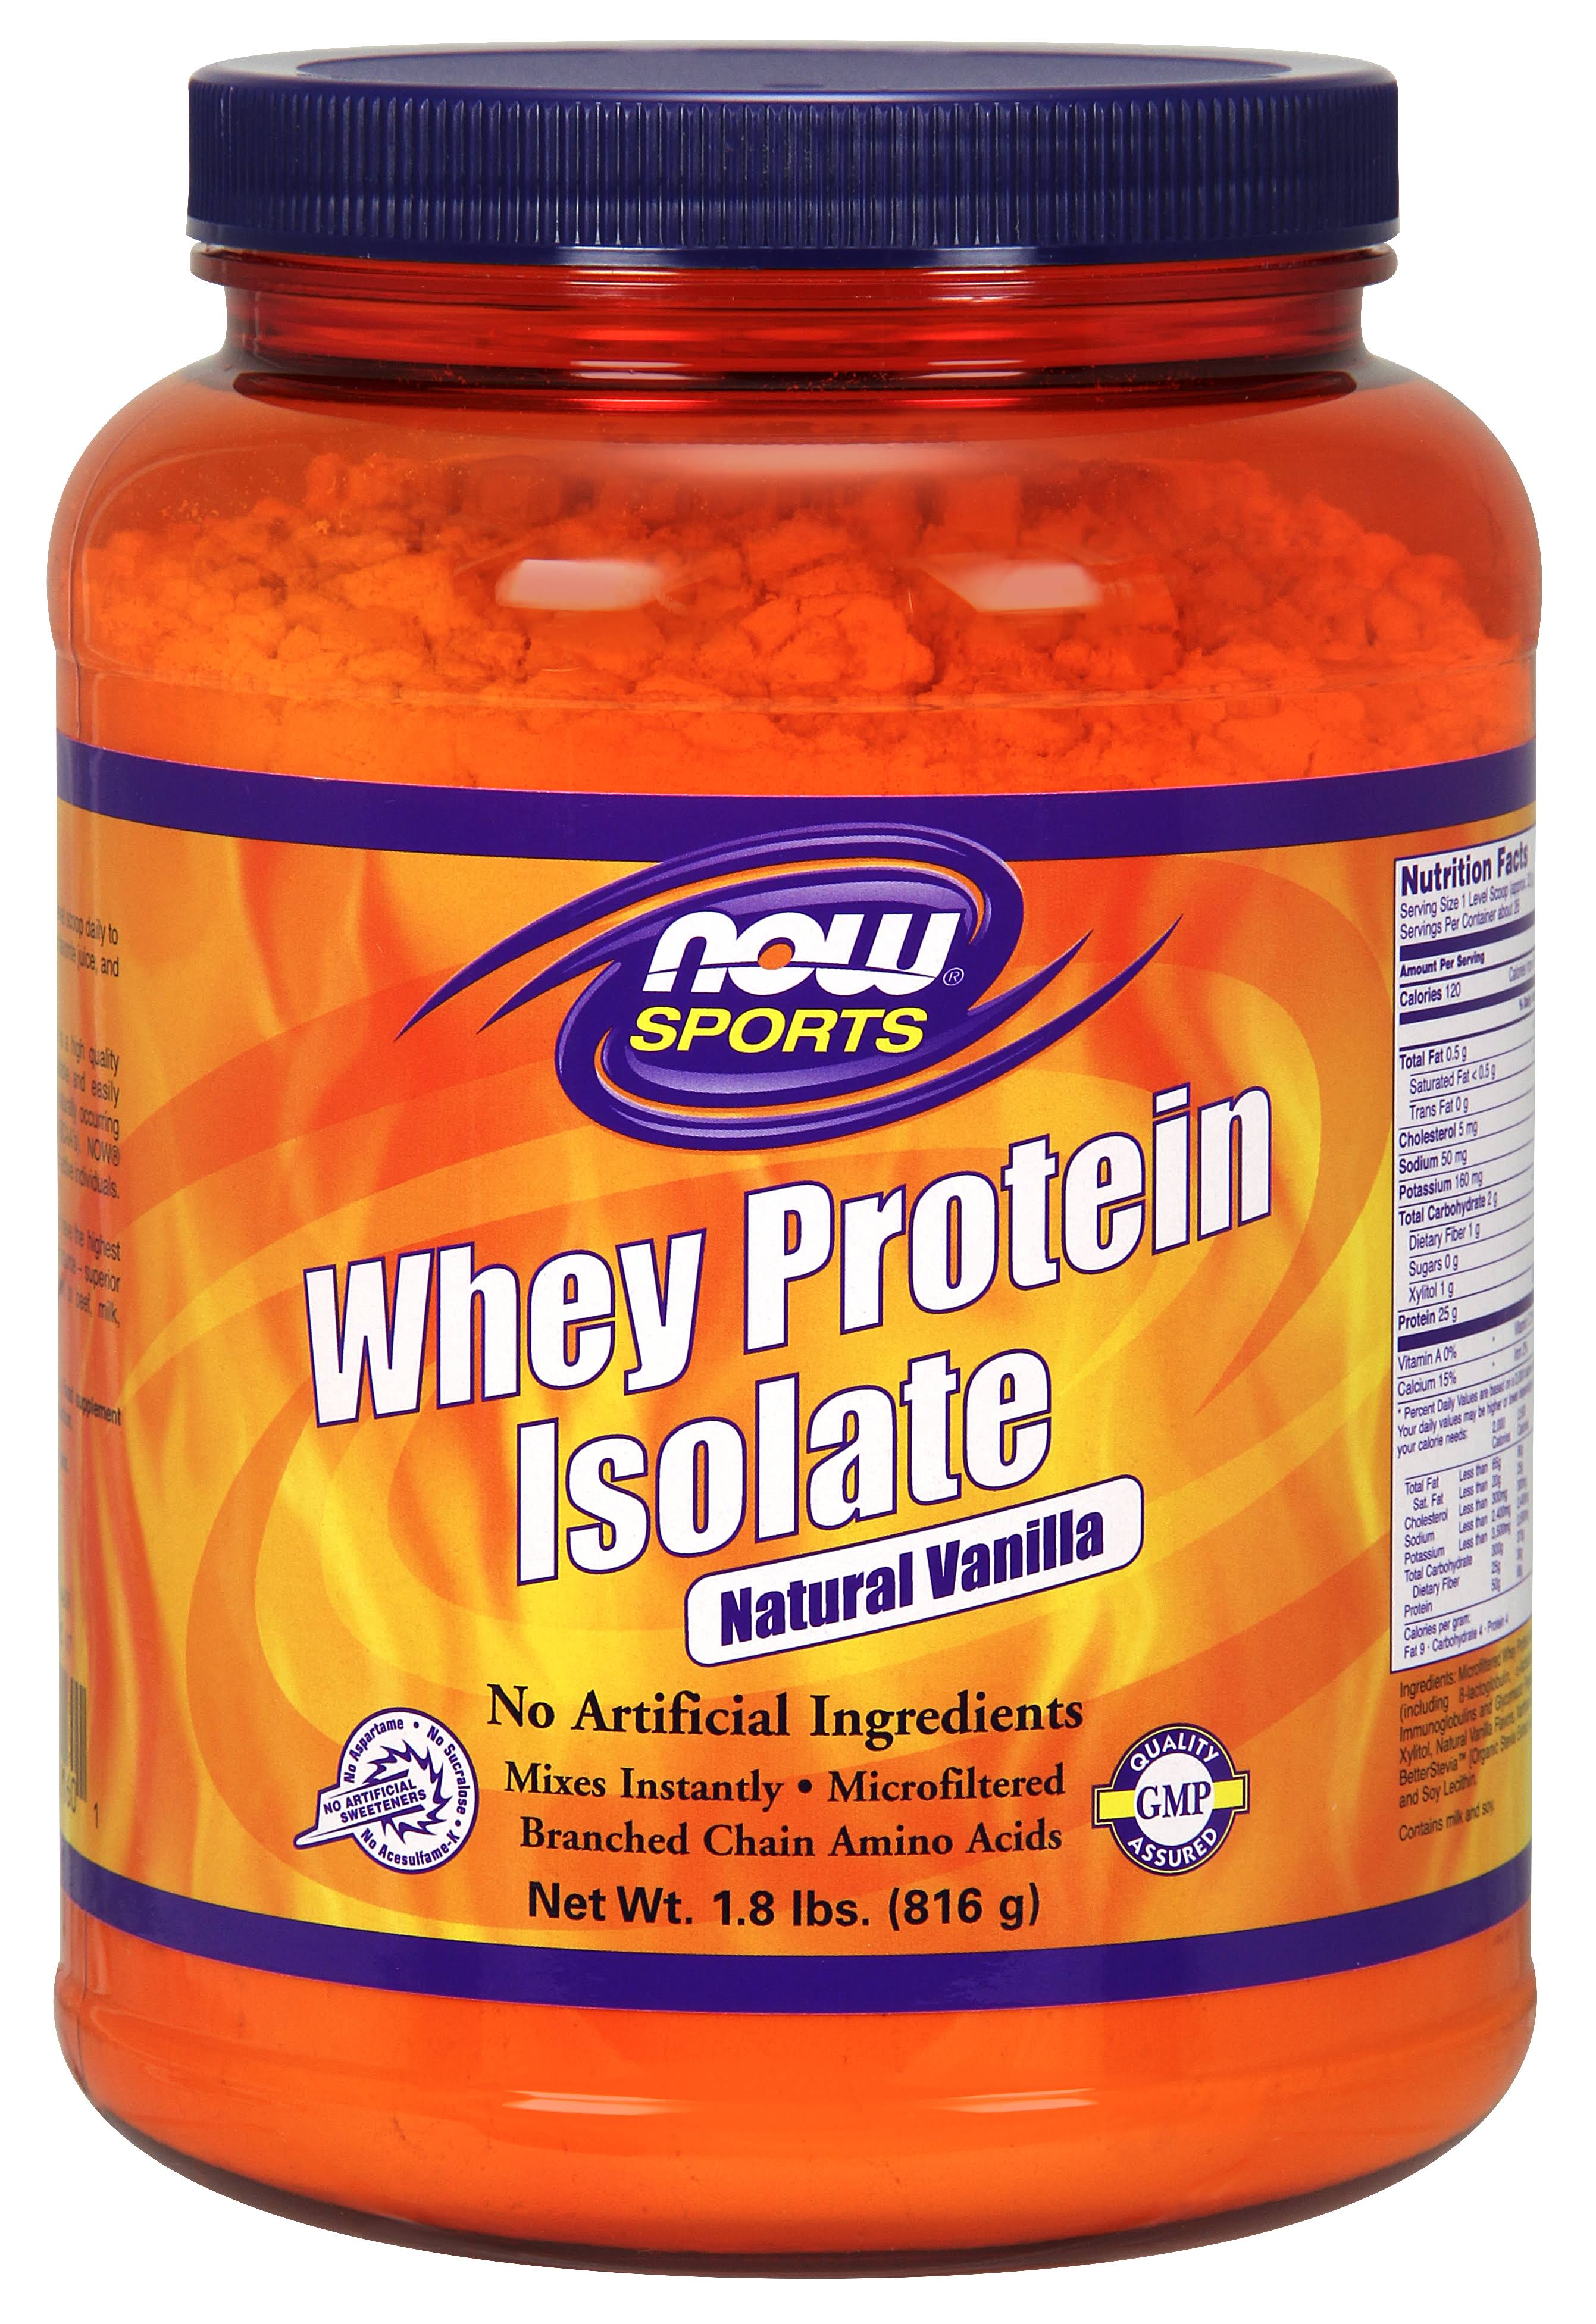 Now Sports Whey Protein Isolate - Natural Vanilla, 1.8lb